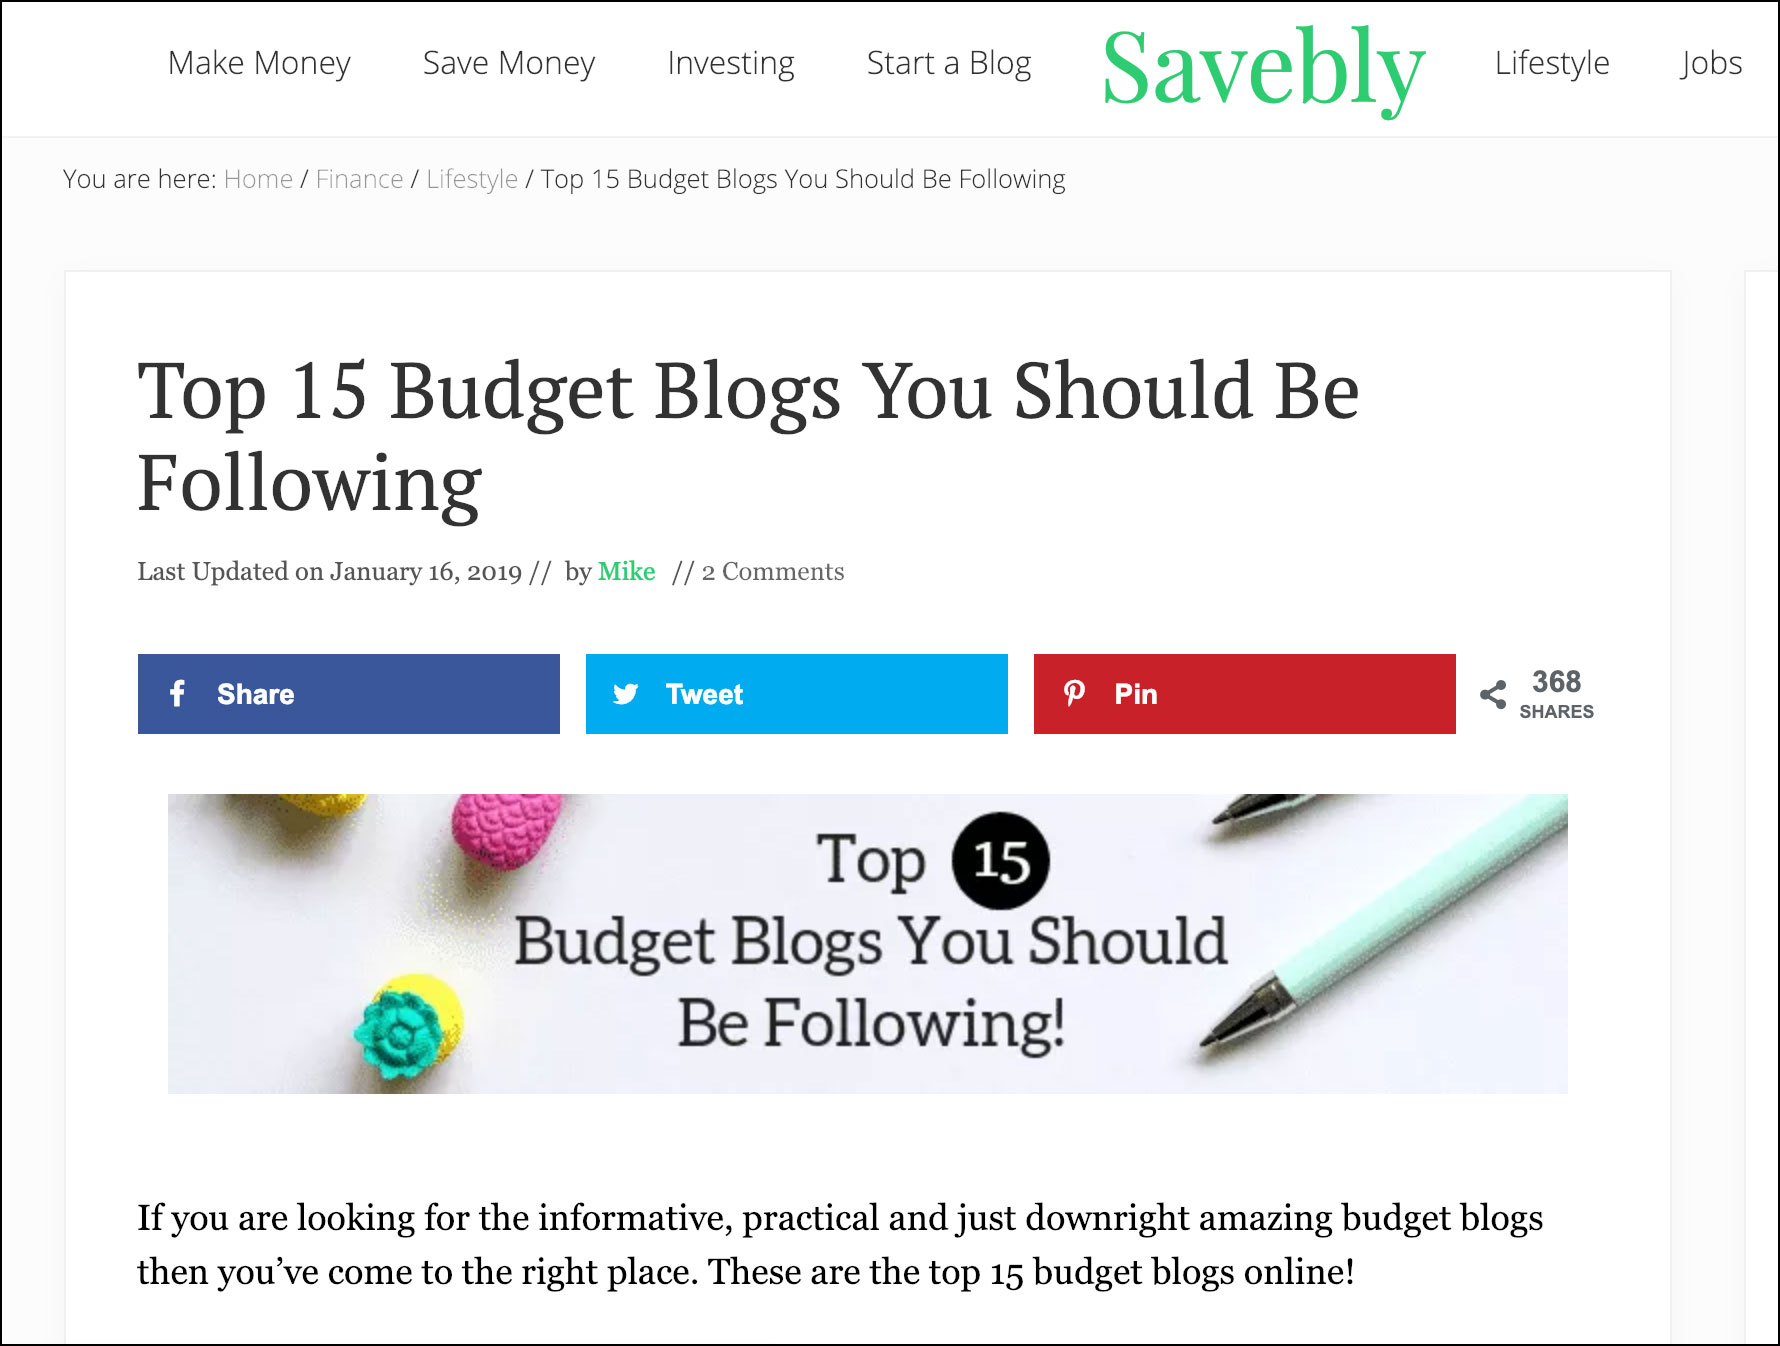 The Top 15 Budget Blogs You Should Be Following